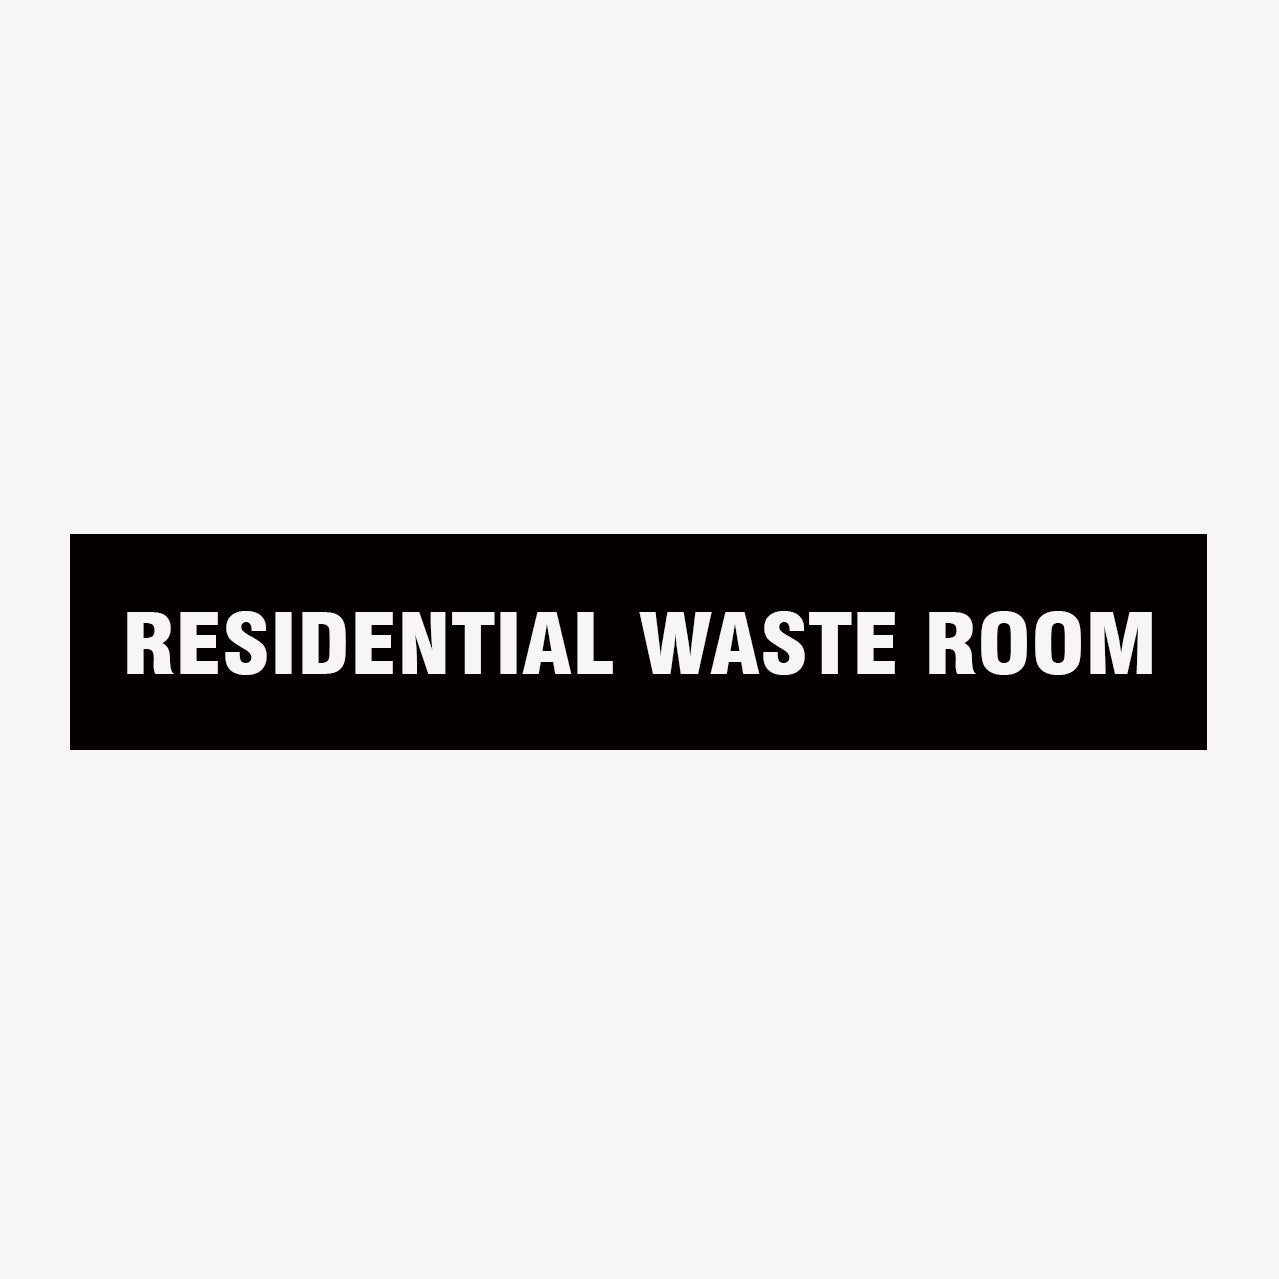 RESIDENTIAL WASTE ROOM SIGN